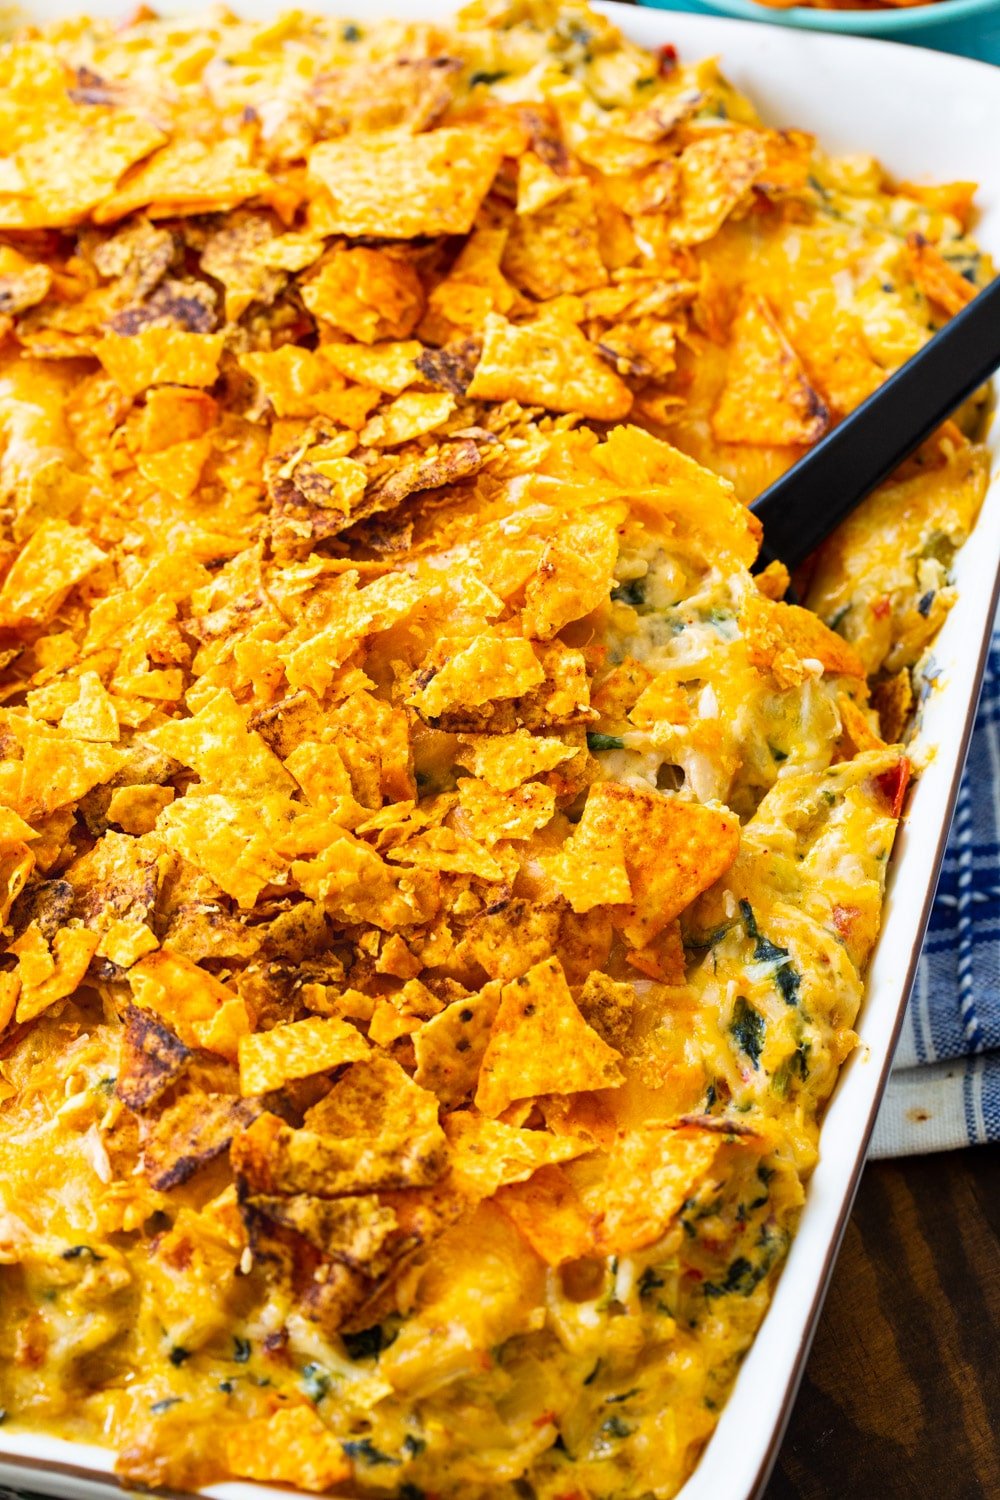 Turkey Casserole with crushed doritos on top.